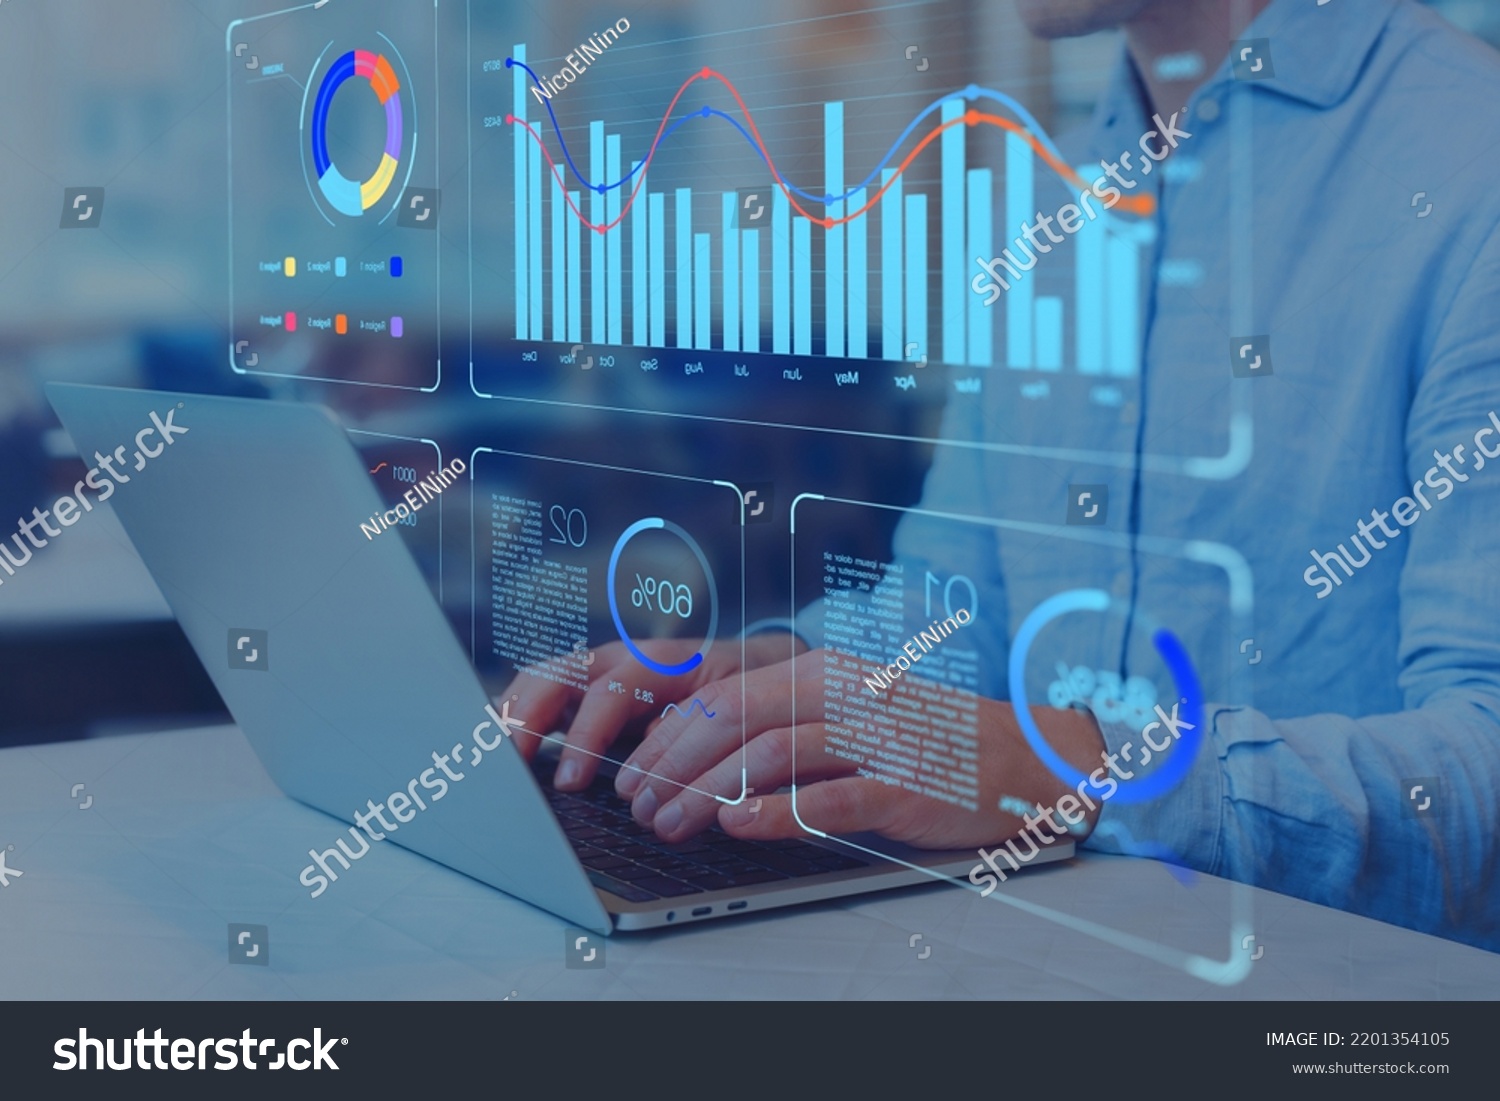 Analyst working on business analytics dashboard with KPI, charts and metrics to analyze data and create insight reports for executives and strategical decisions. Operations and performance management. #2201354105